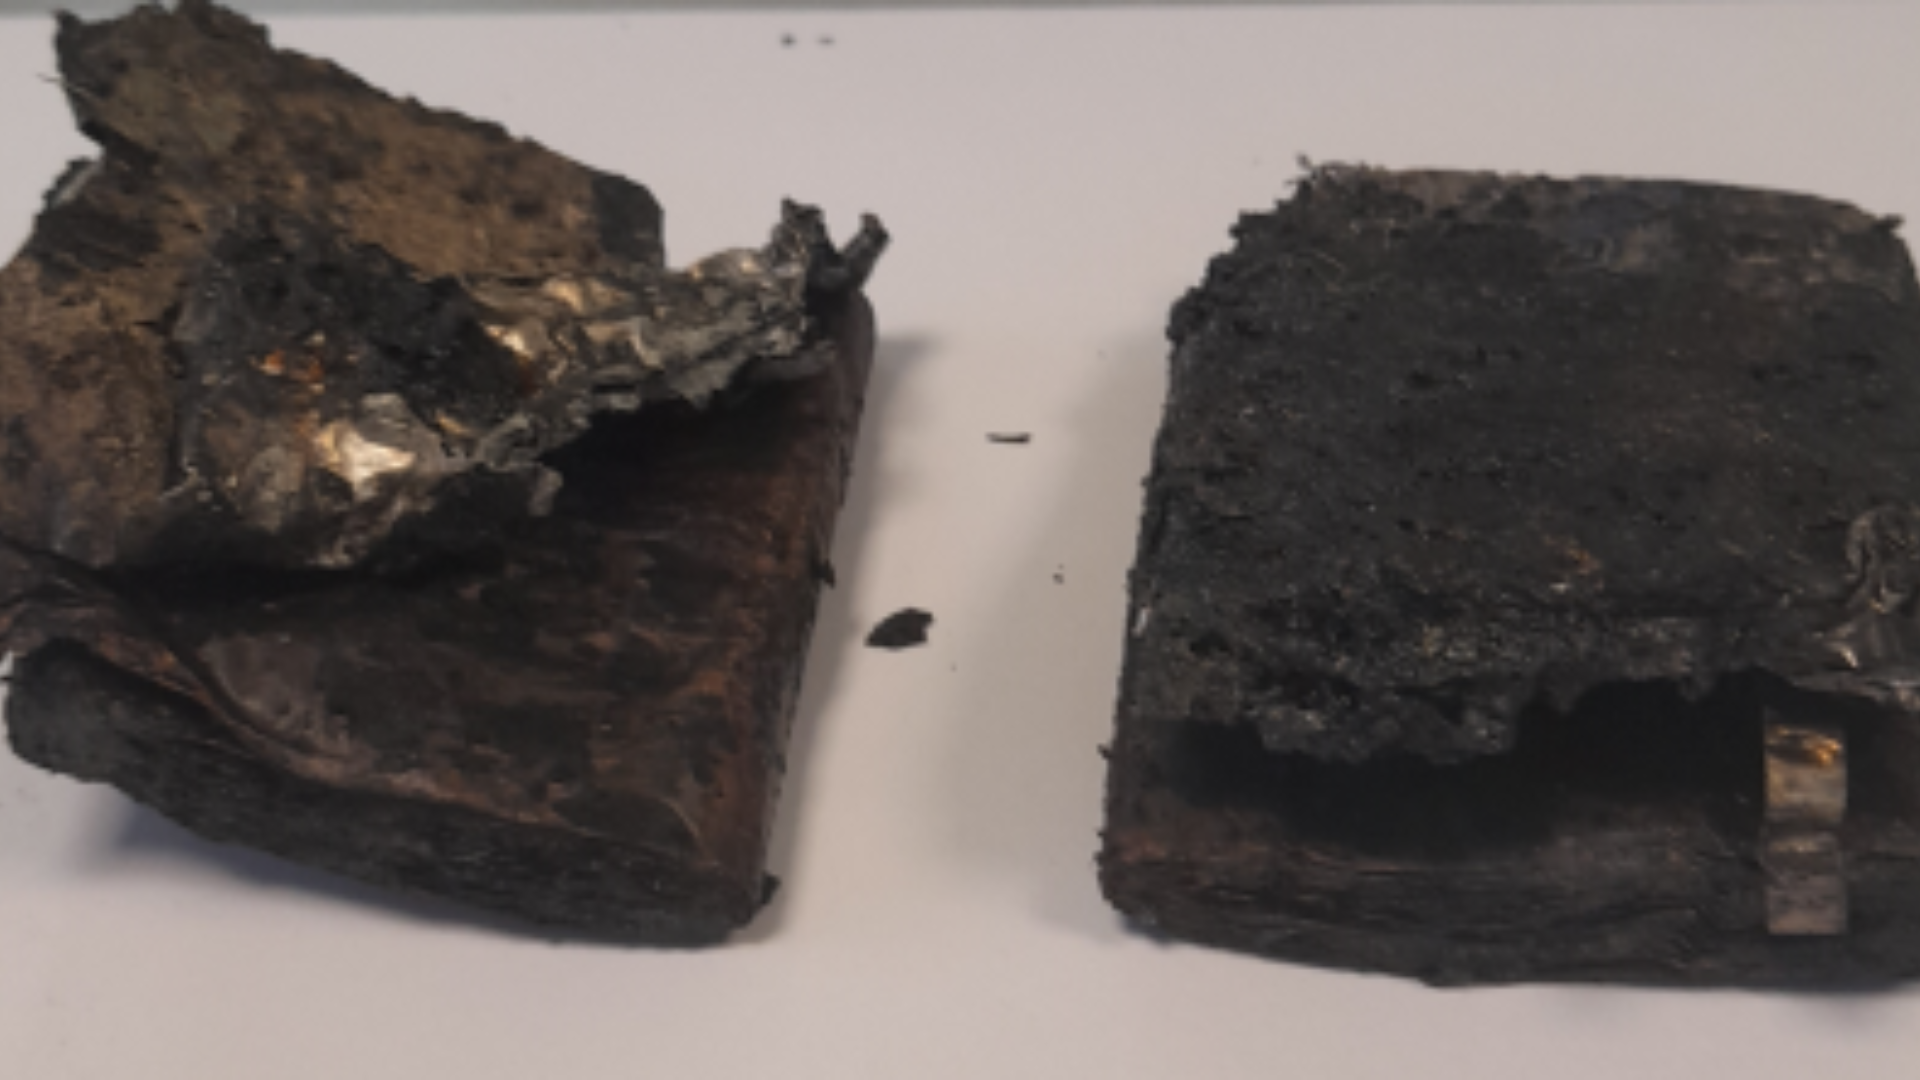 The remains of a burnt battery